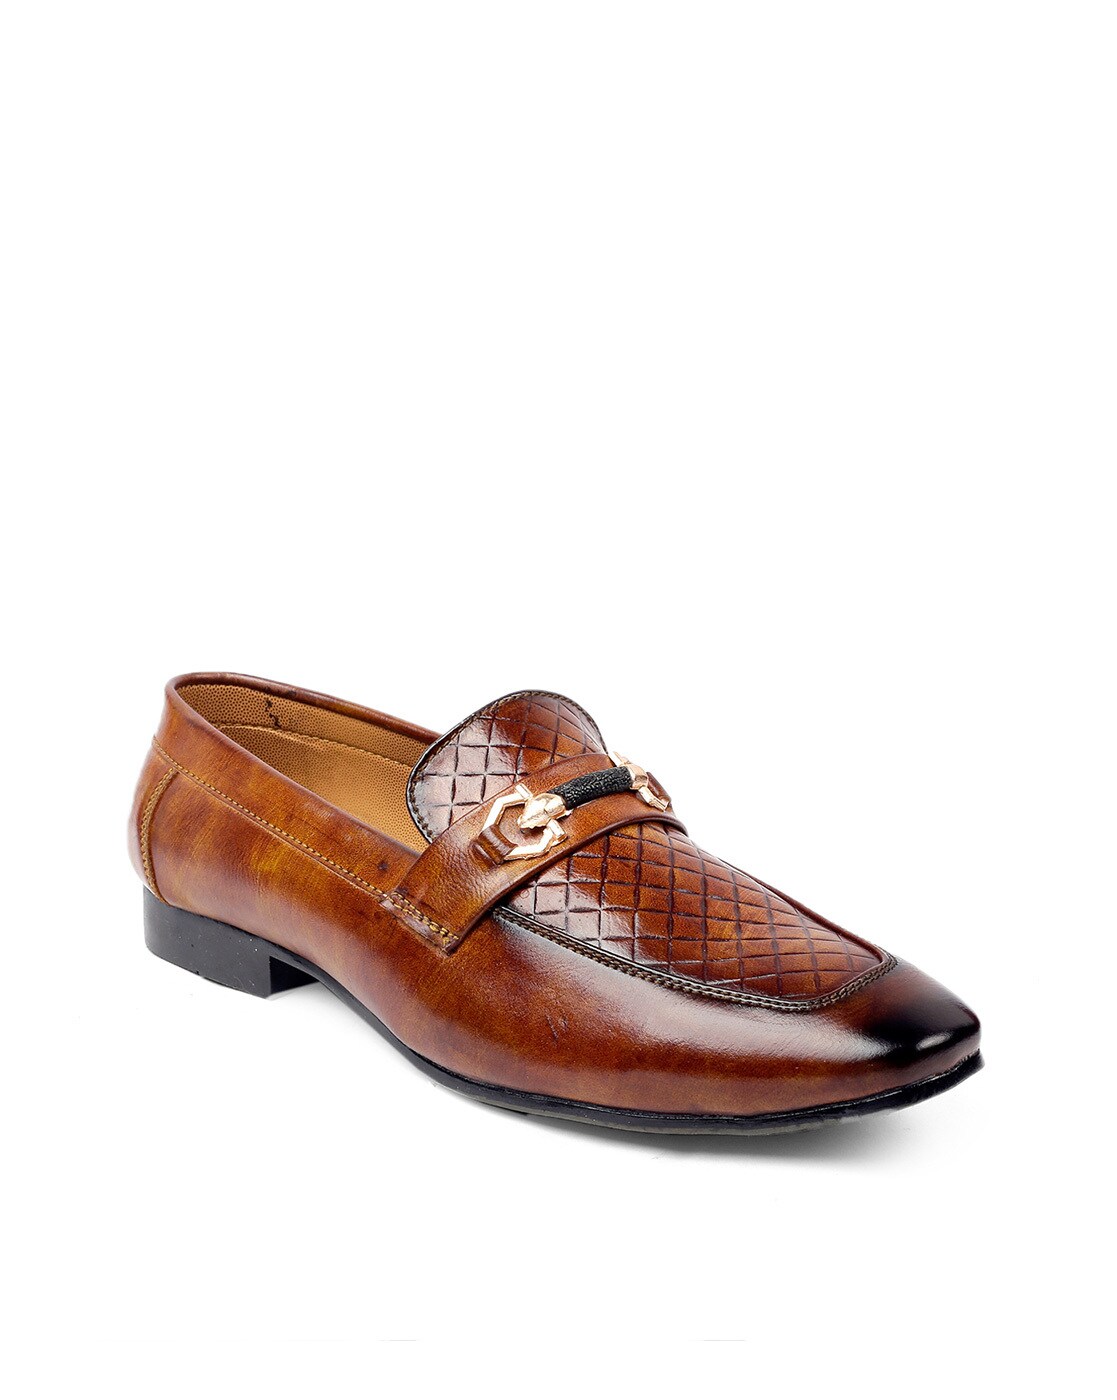 Leather Loafer Formal Shoes For Men – 2129 | Buy Loafer Shoes Online – Zoom  Shoes India